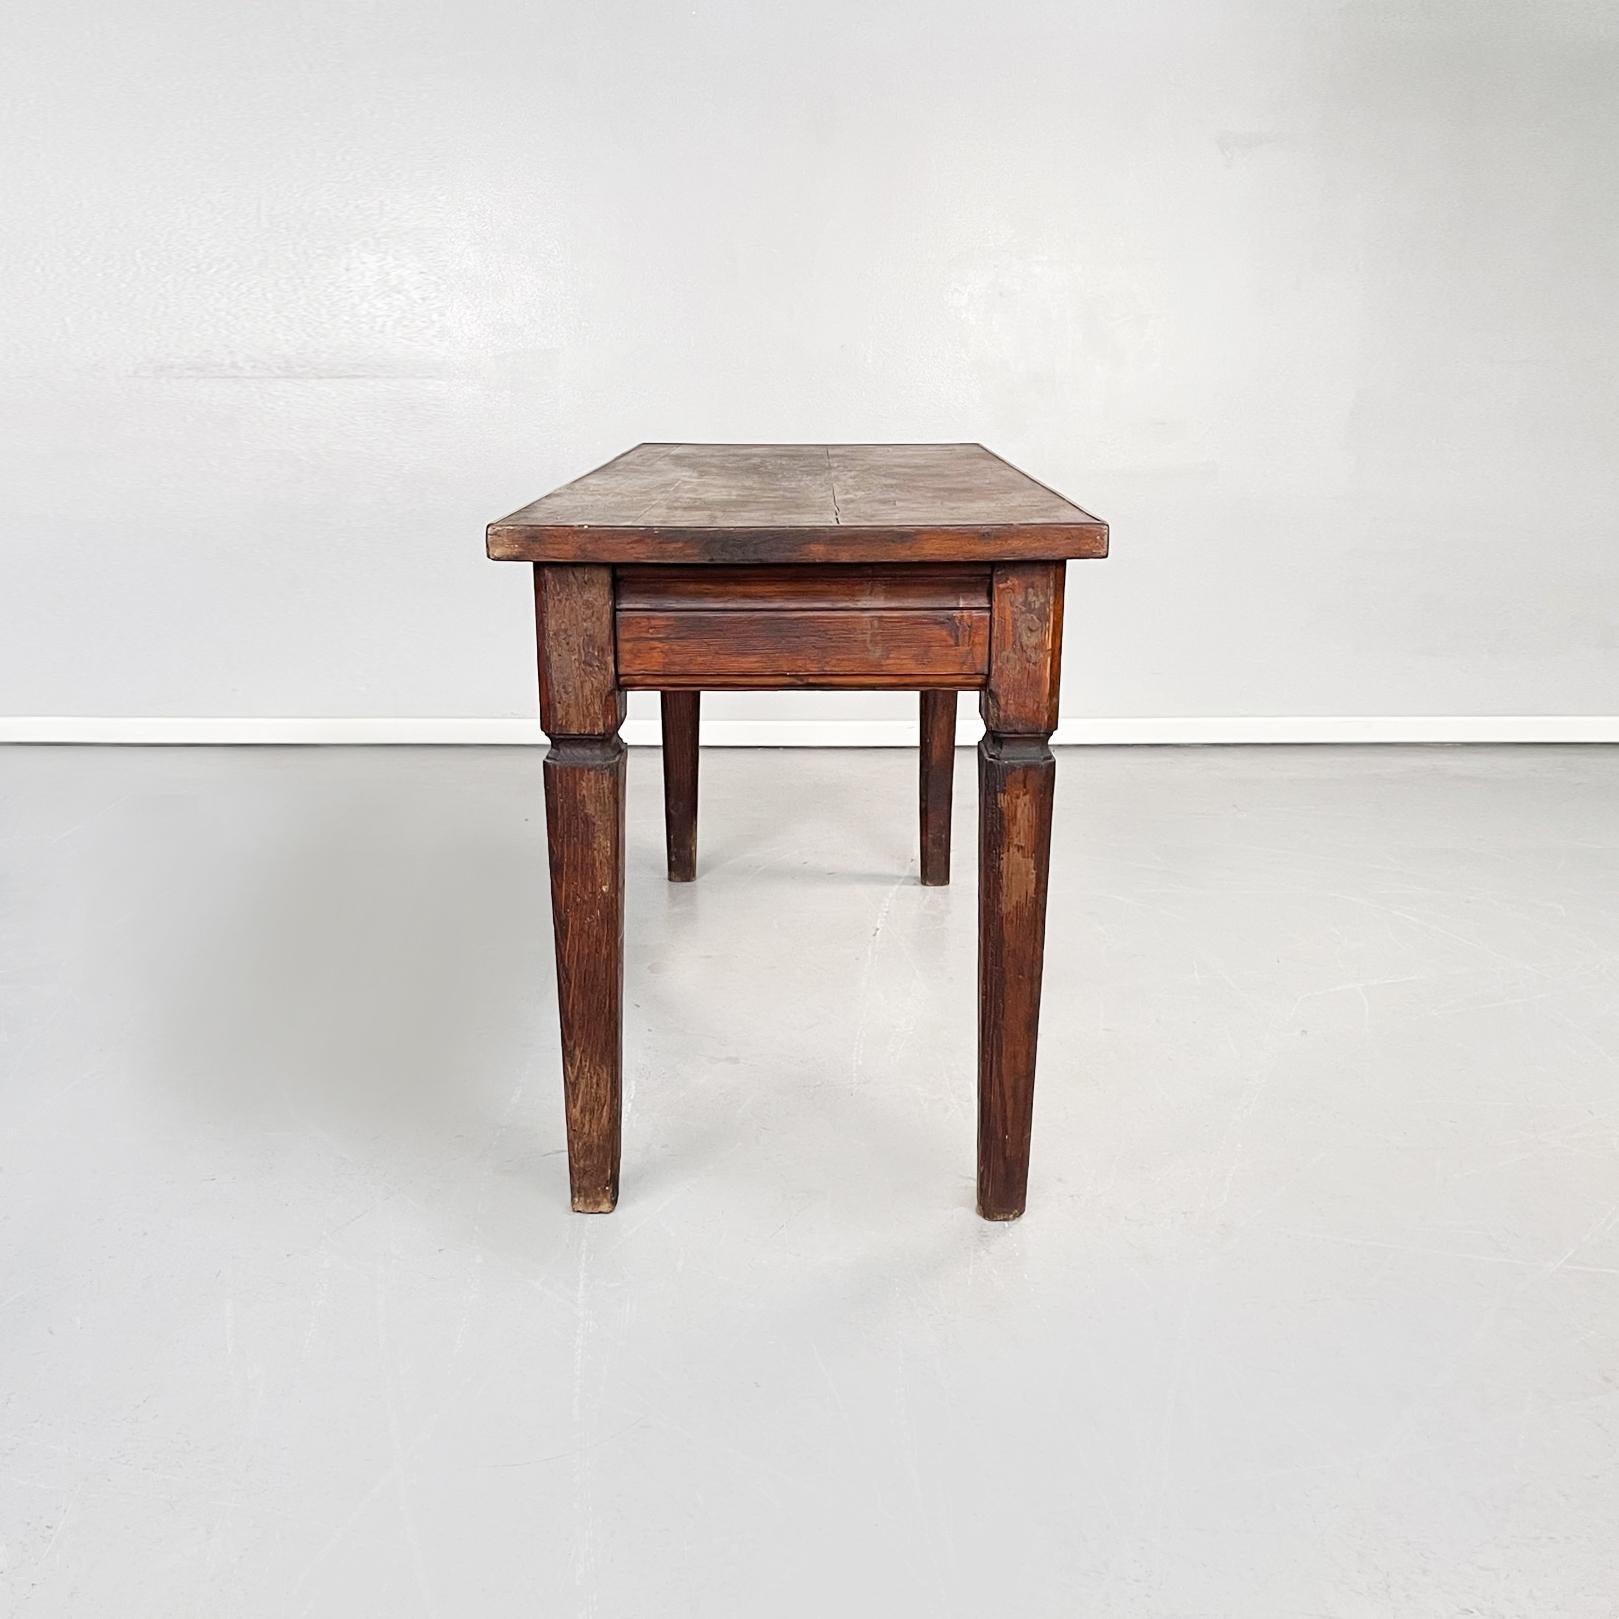 Italian antique Rectangular dining table in dark solid wood , 1900s
Antique simple but elegant dining table in dark solid wood . With rectangular top. Massive legs with a simple silhouette that tighten towards the base. 
Of fine Italian